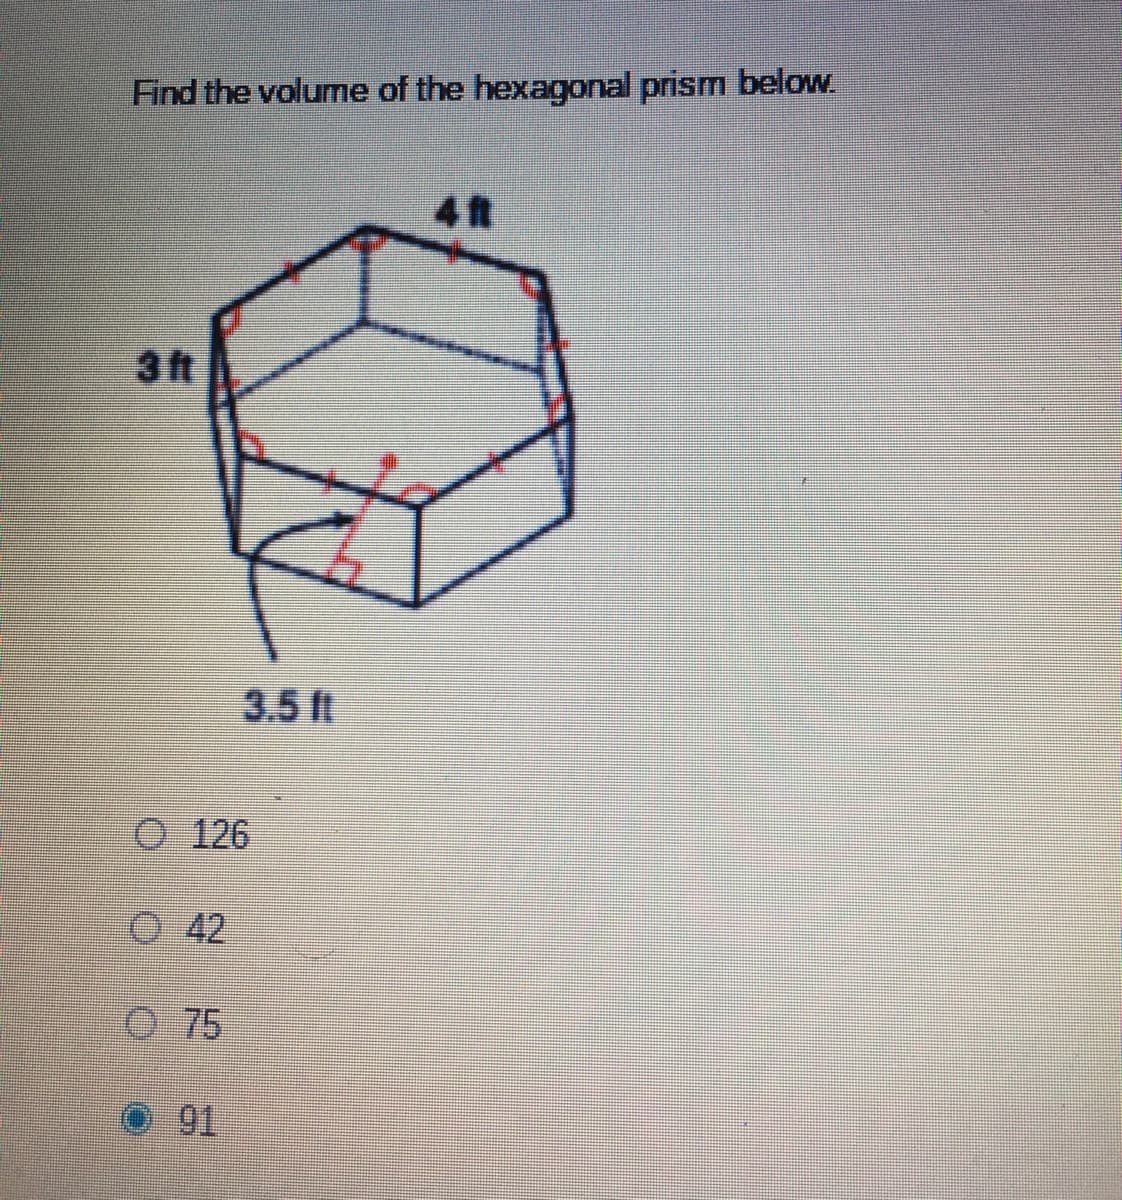 Find the volume of the hexagonal prism below.
4 t
3ft
3.5 ft
O 126
0 42
O 75
91
